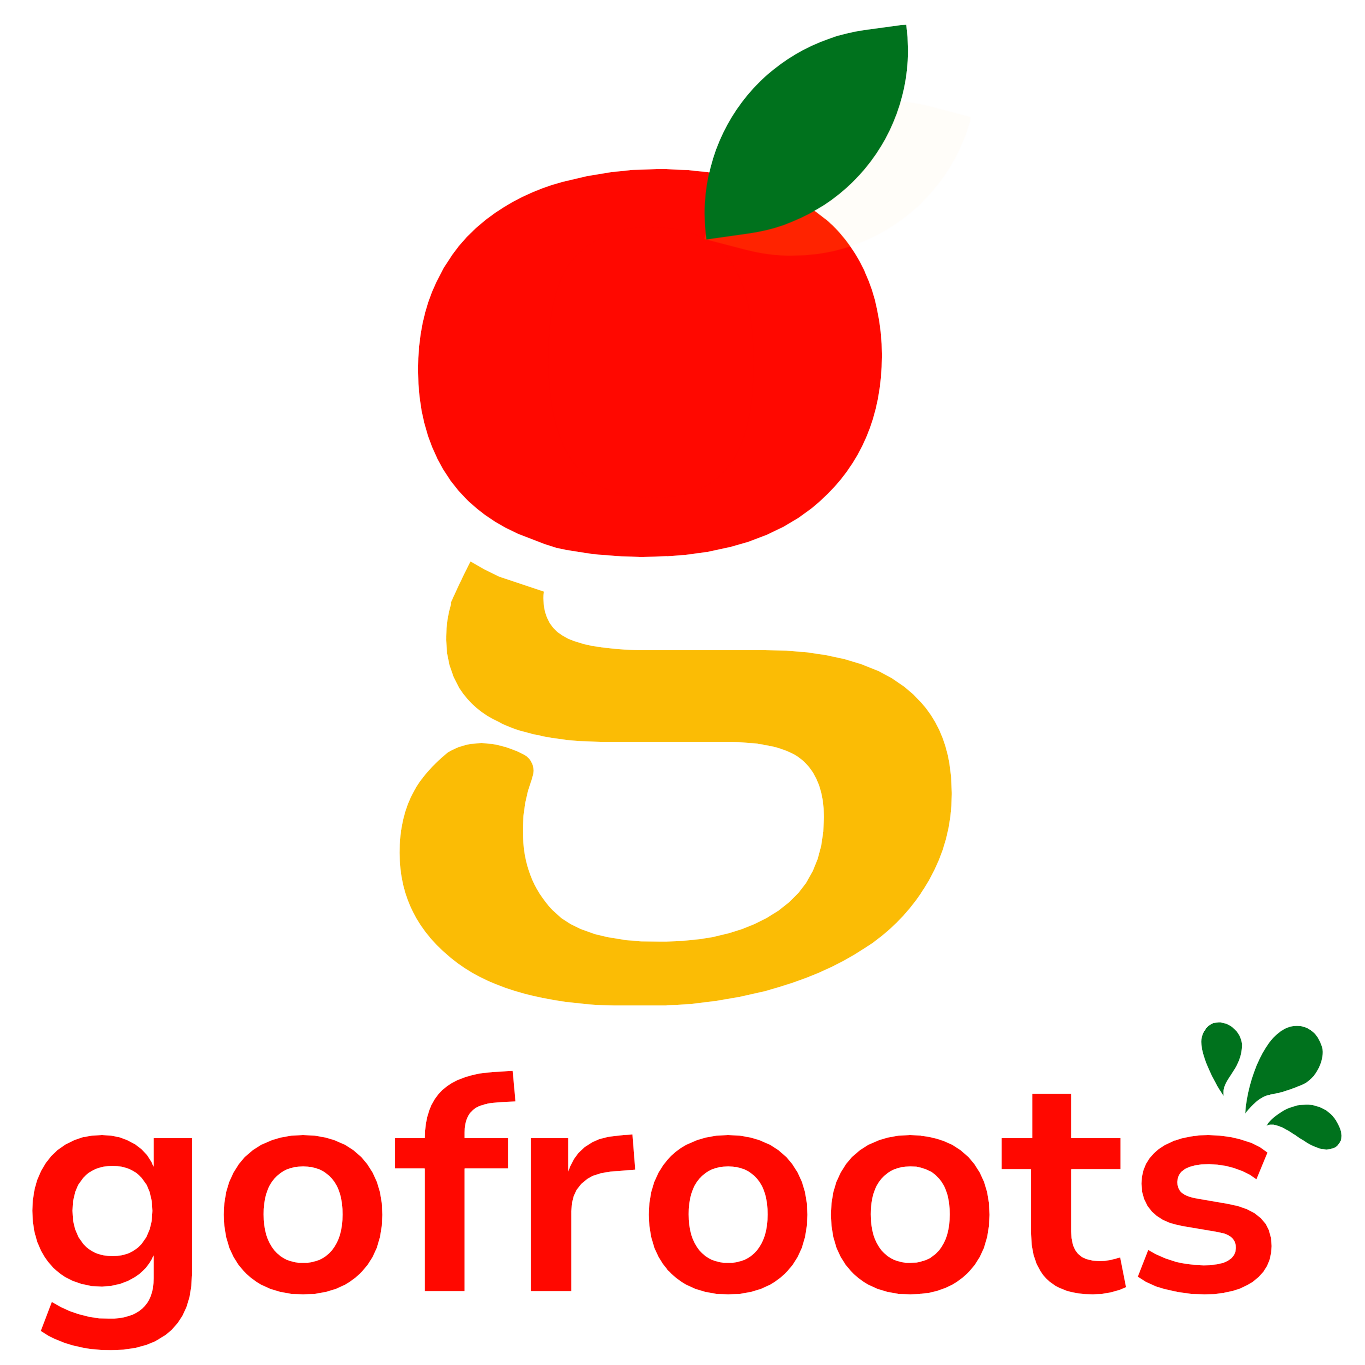 gofroots.in